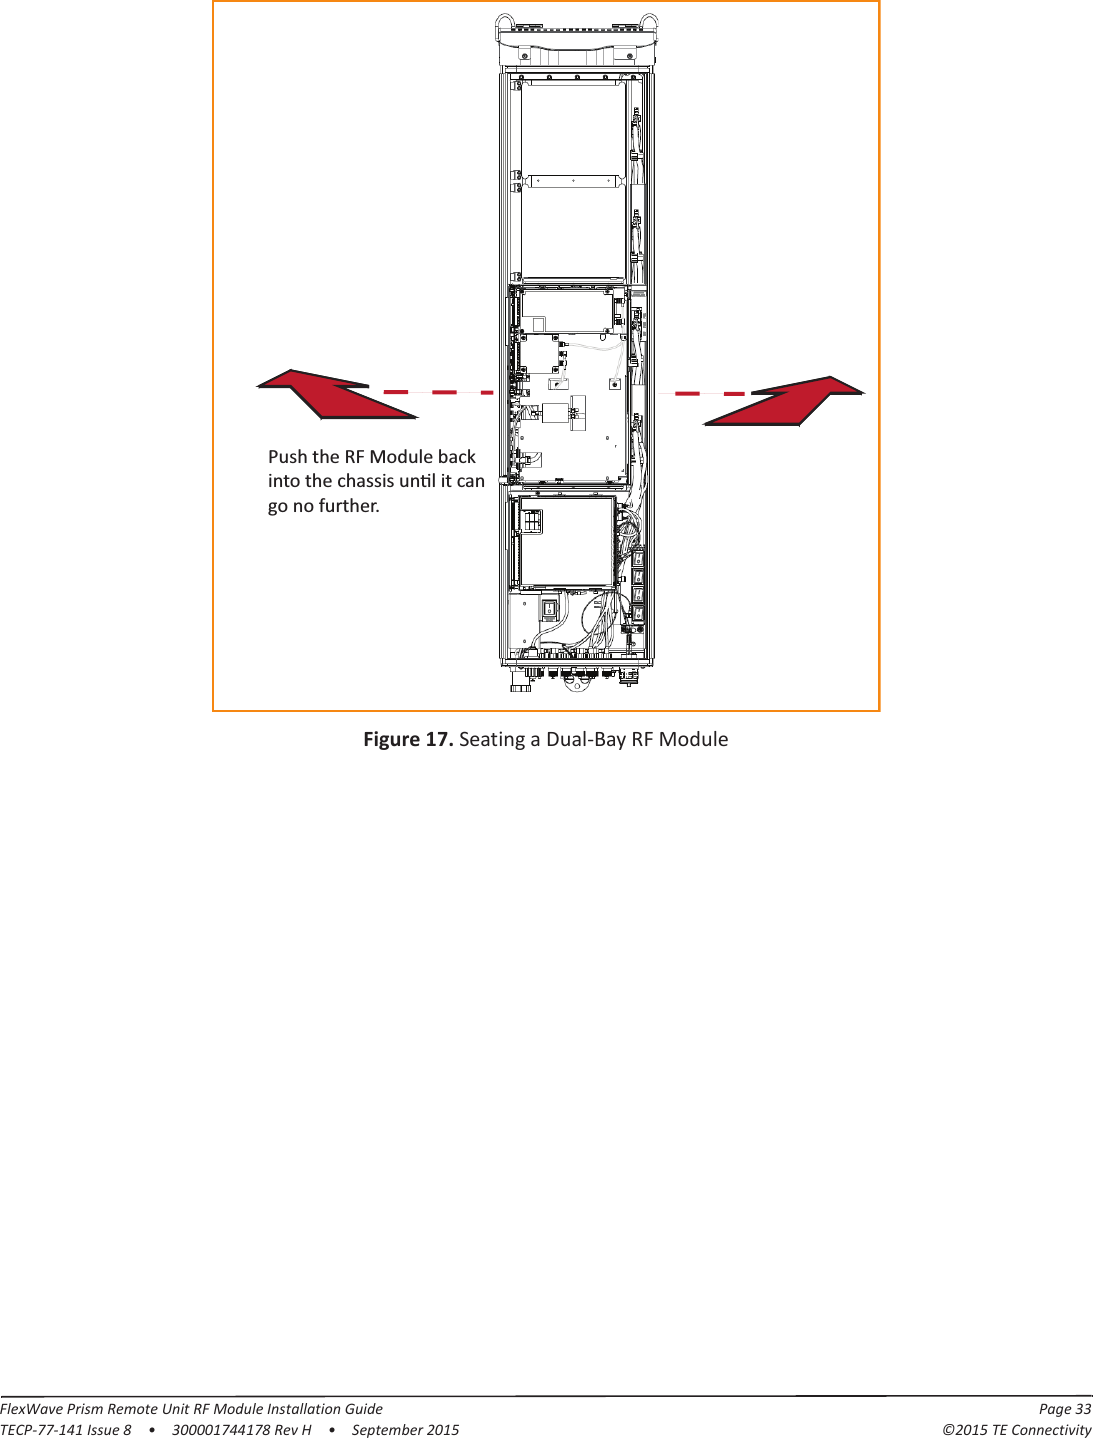 FlexWave Prism Remote Unit RF Module Installation Guide Page 33TECP-77-141 Issue 8  •  300001744178 Rev H  •  September 2015 ©2015 TE ConnectivityFigure 17. Seating a Dual-Bay RF ModulePush the RF Module backinto the chassis unƟl it cango no further.